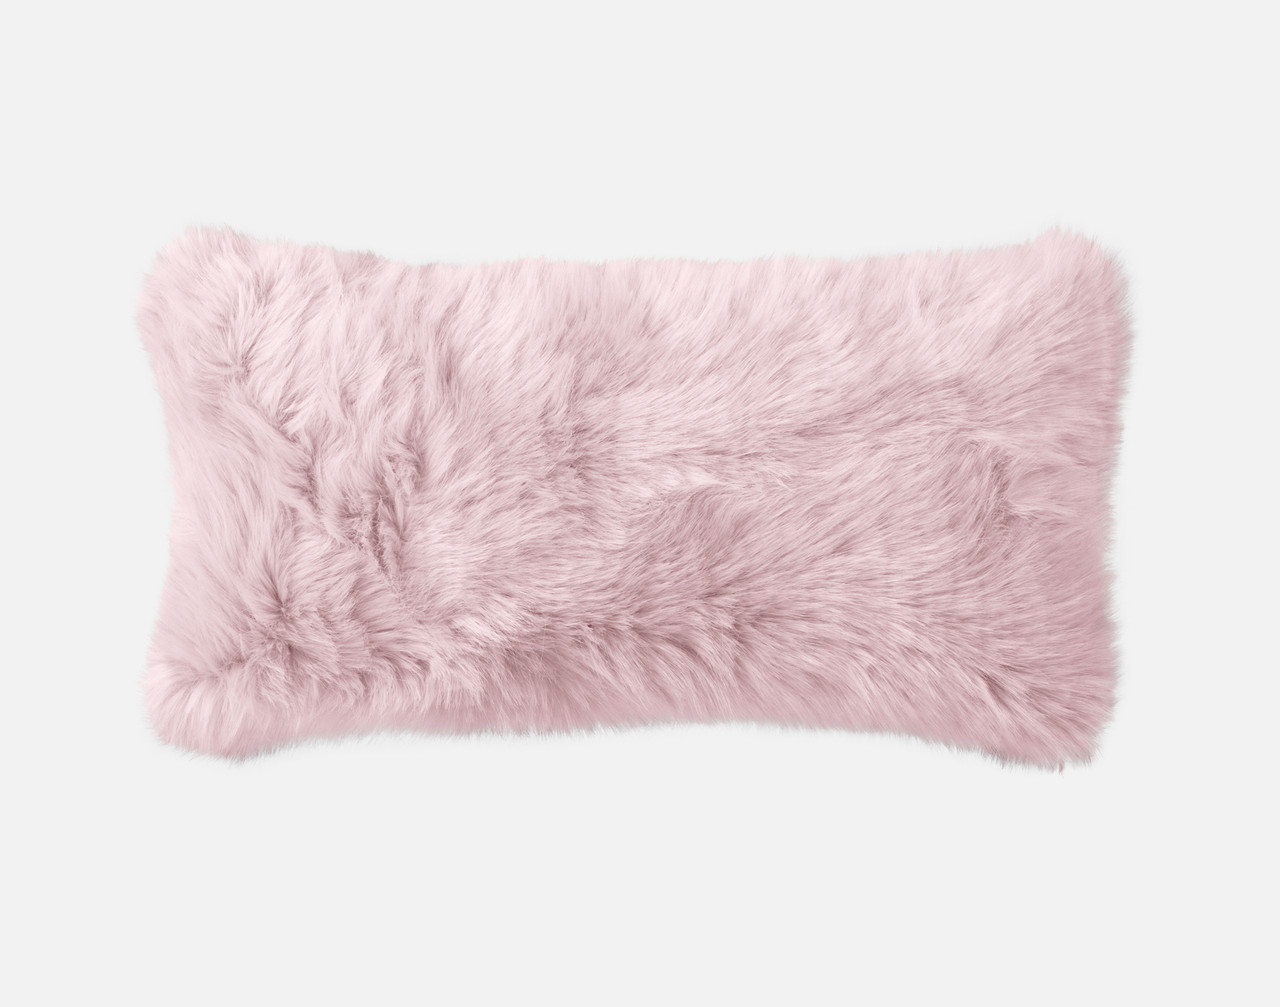 Front view of our Angora Boudoir Cushion Cover in Camellia Pink against a white background.